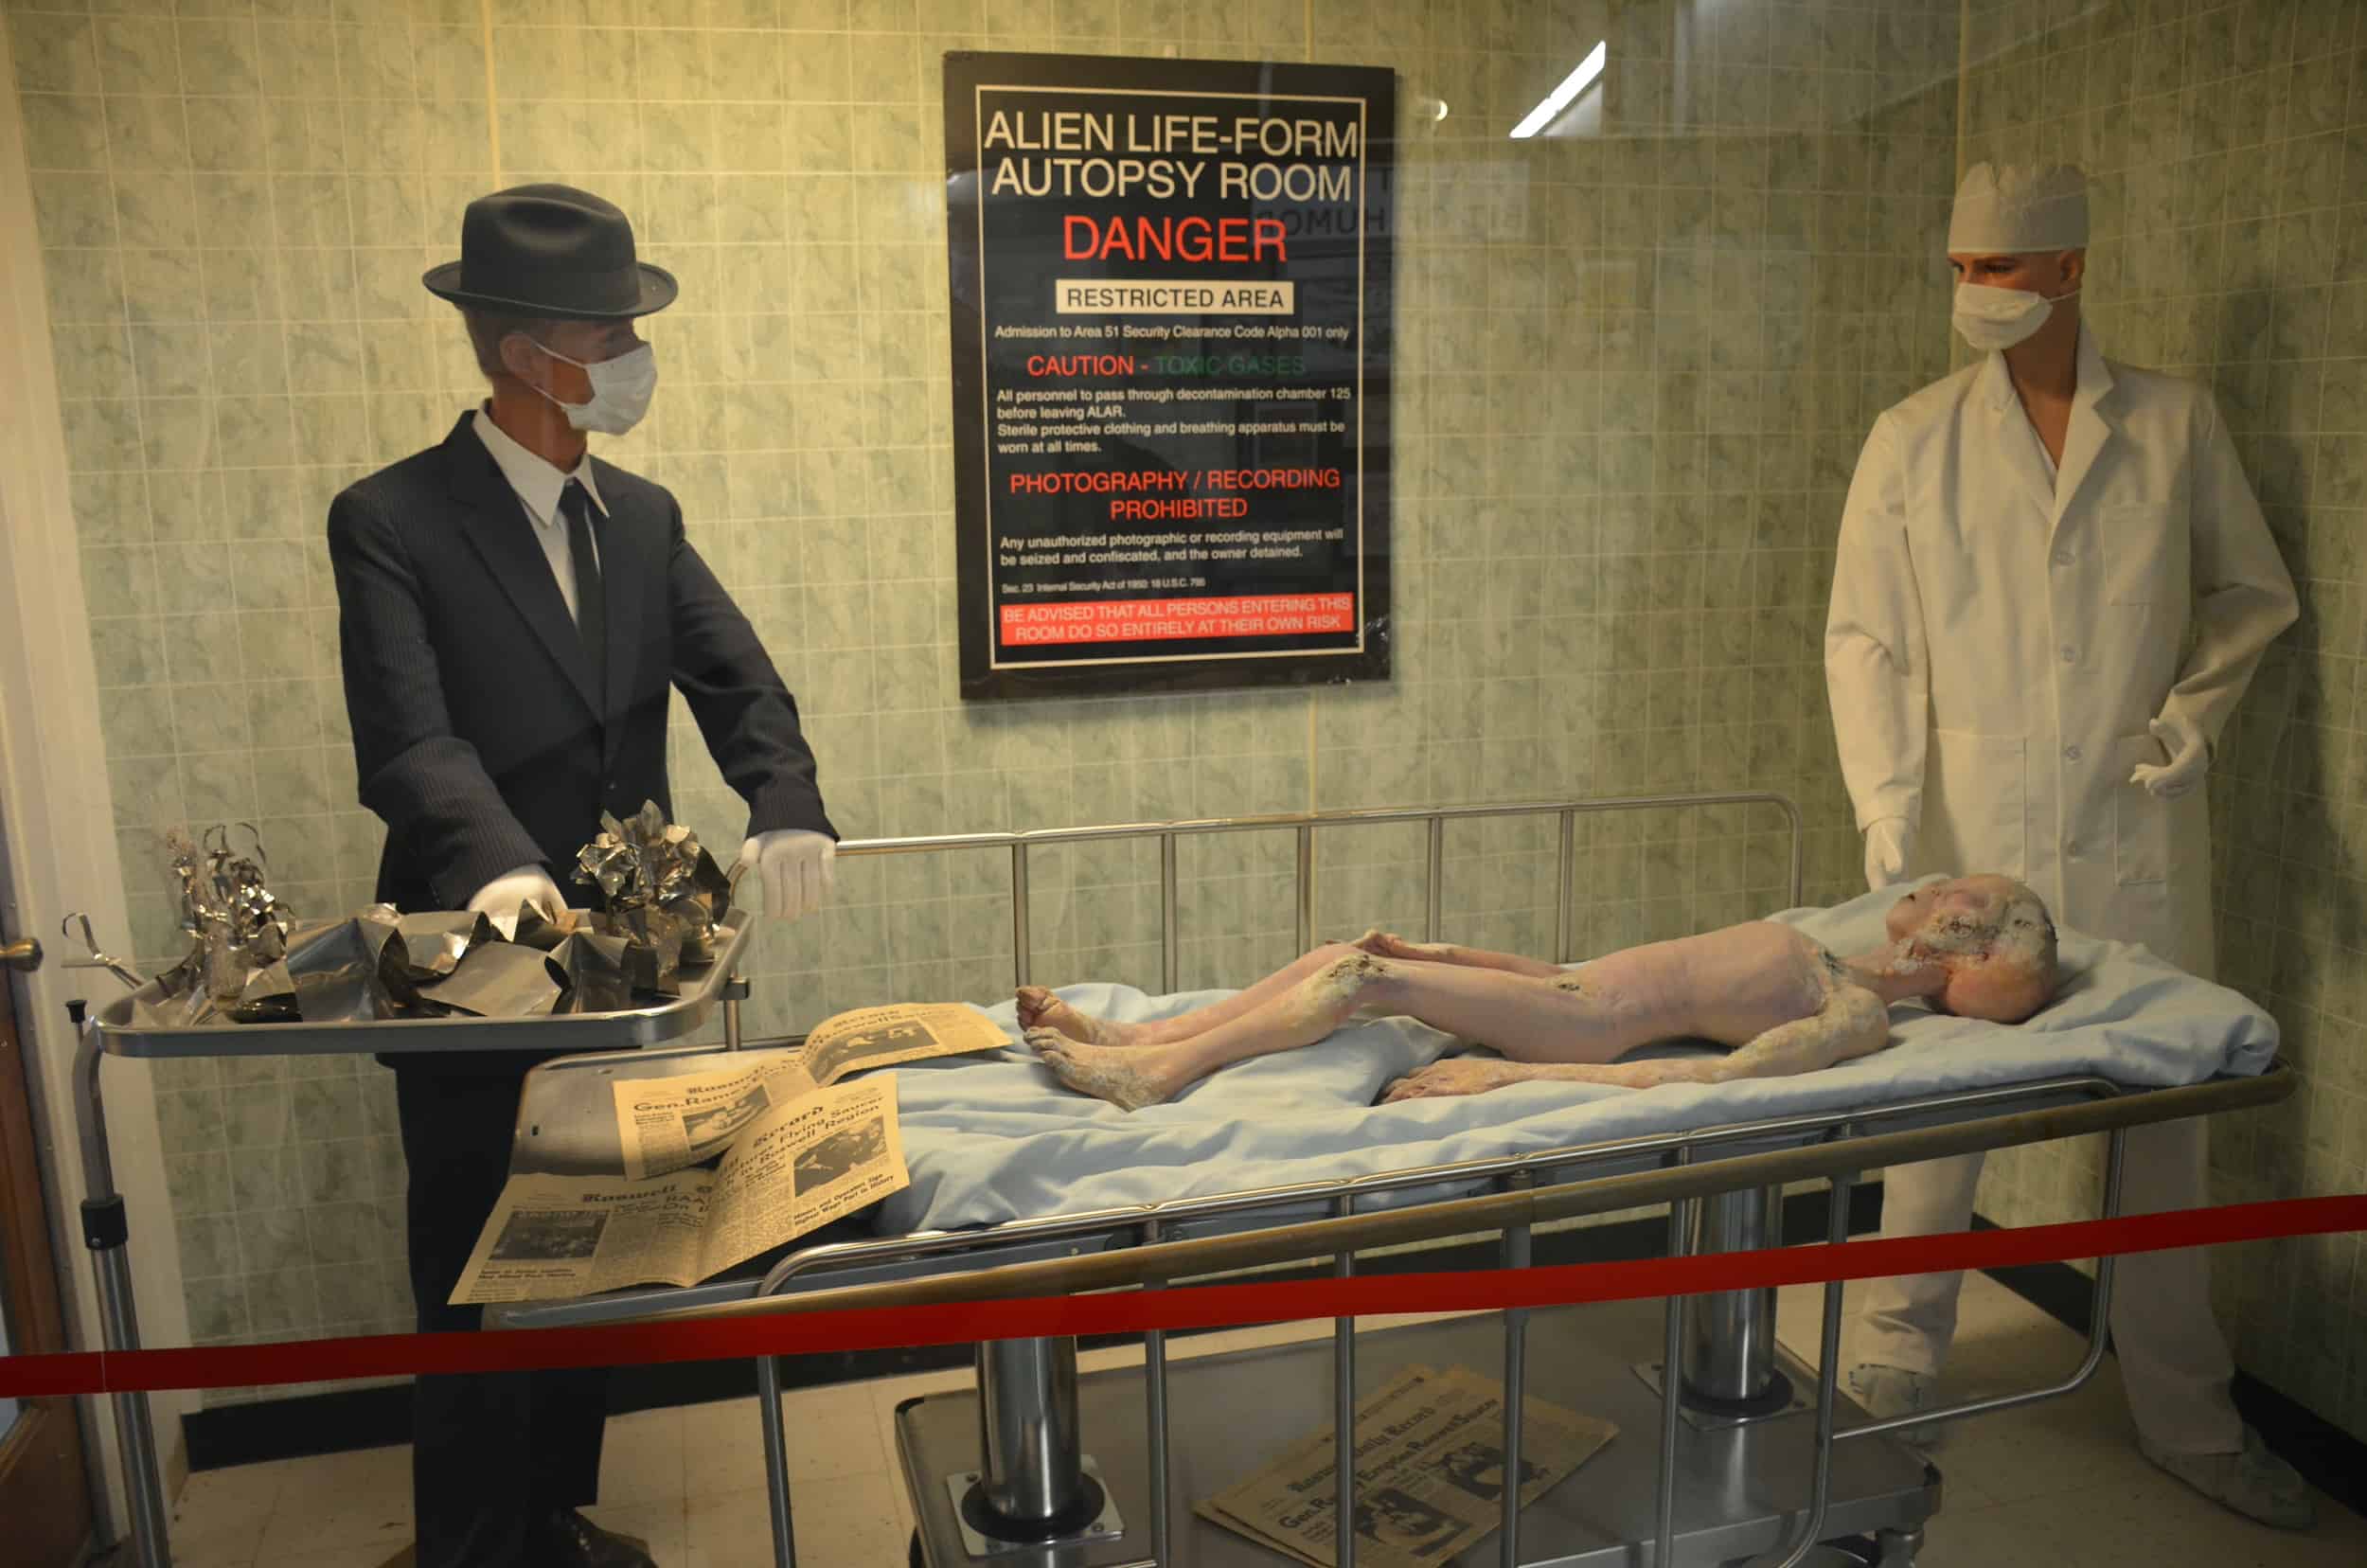 Alien autopsy at the International UFO Museum and Research Center in Roswell, New Mexico